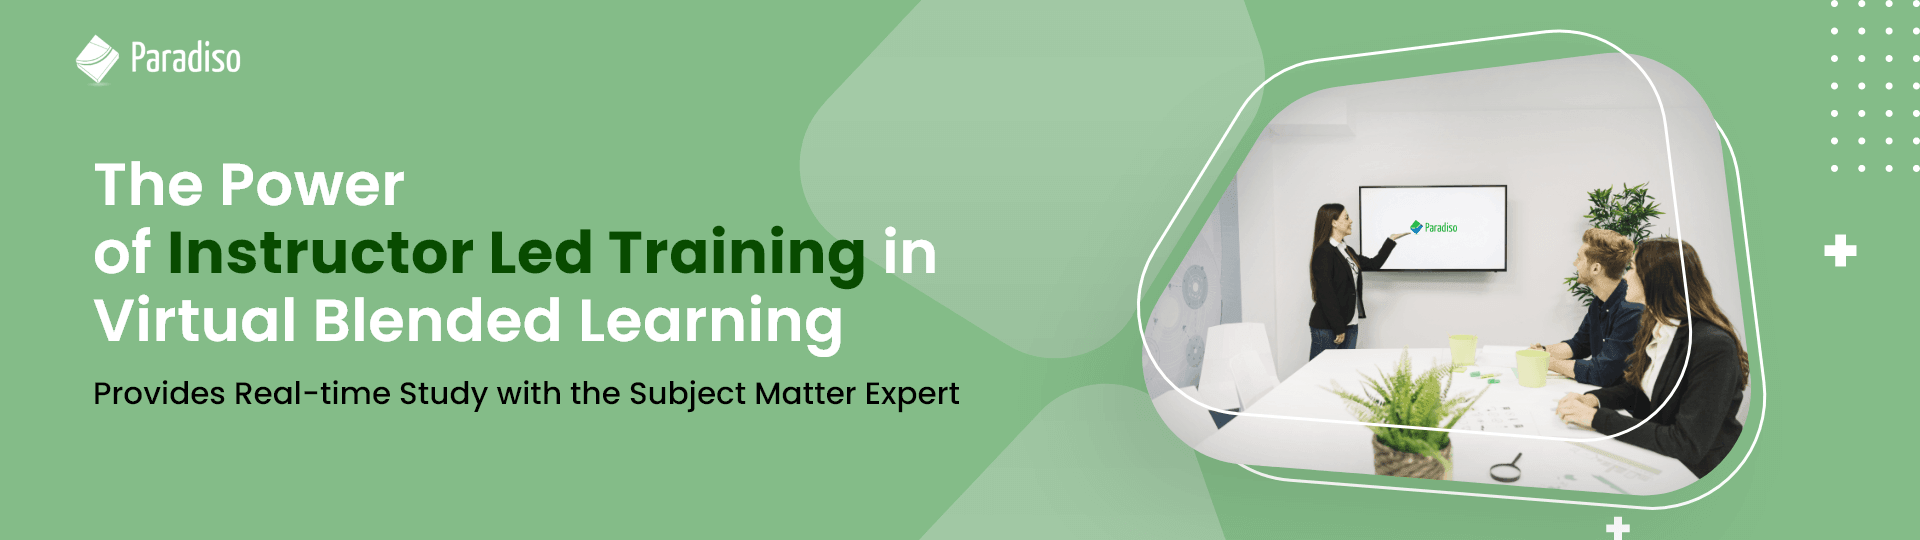 instructor led training in virtual blended learning